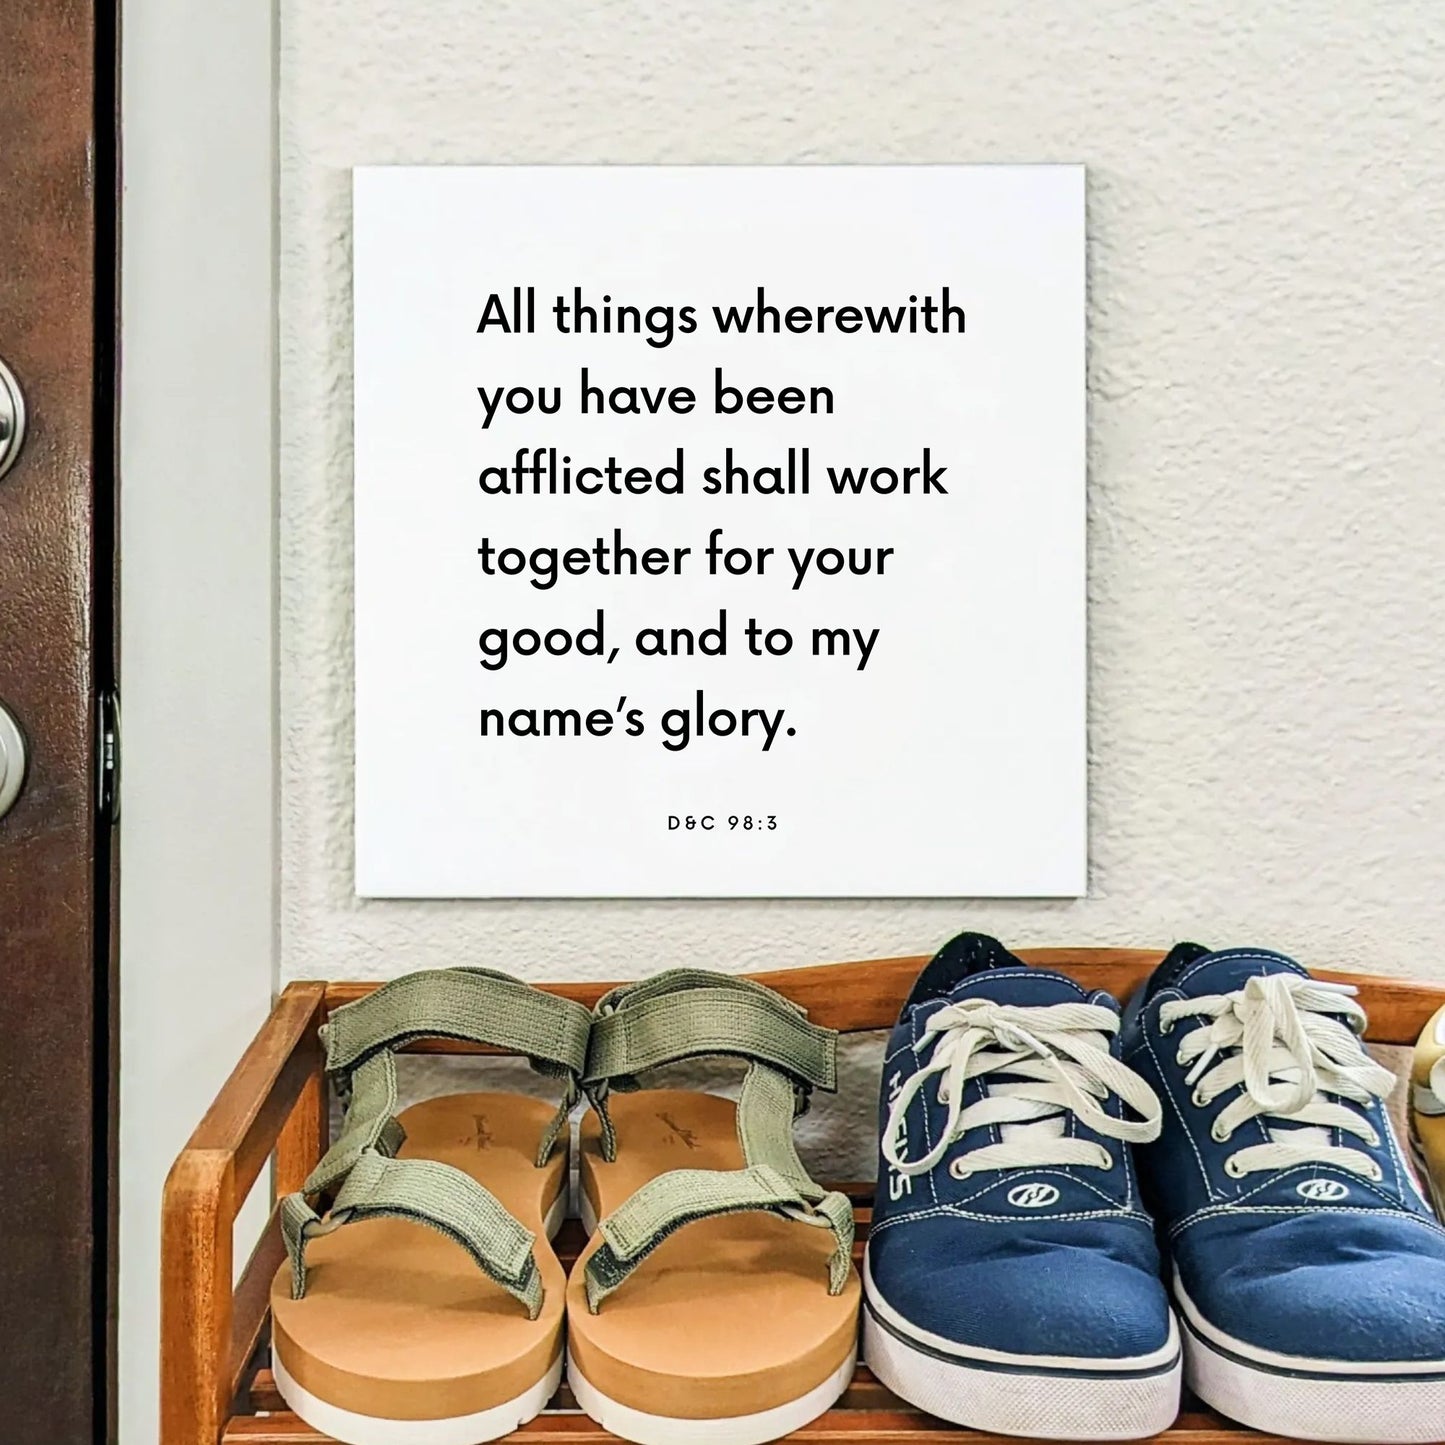 Shoes mouting of the scripture tile for D&C 98:3 - "All things wherewith you have been afflicted"